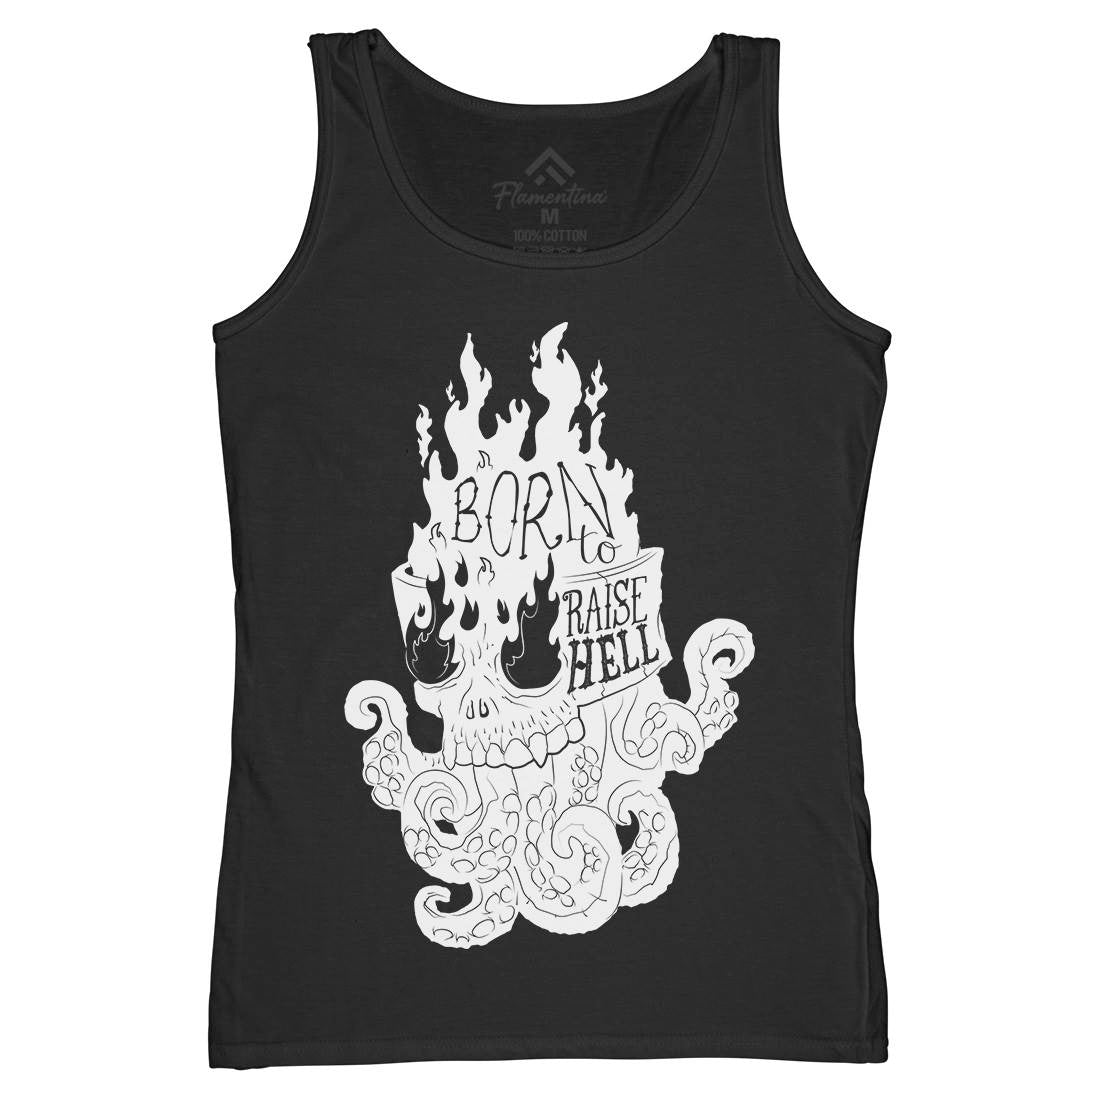 Raise Hell Womens Organic Tank Top Vest Motorcycles A960